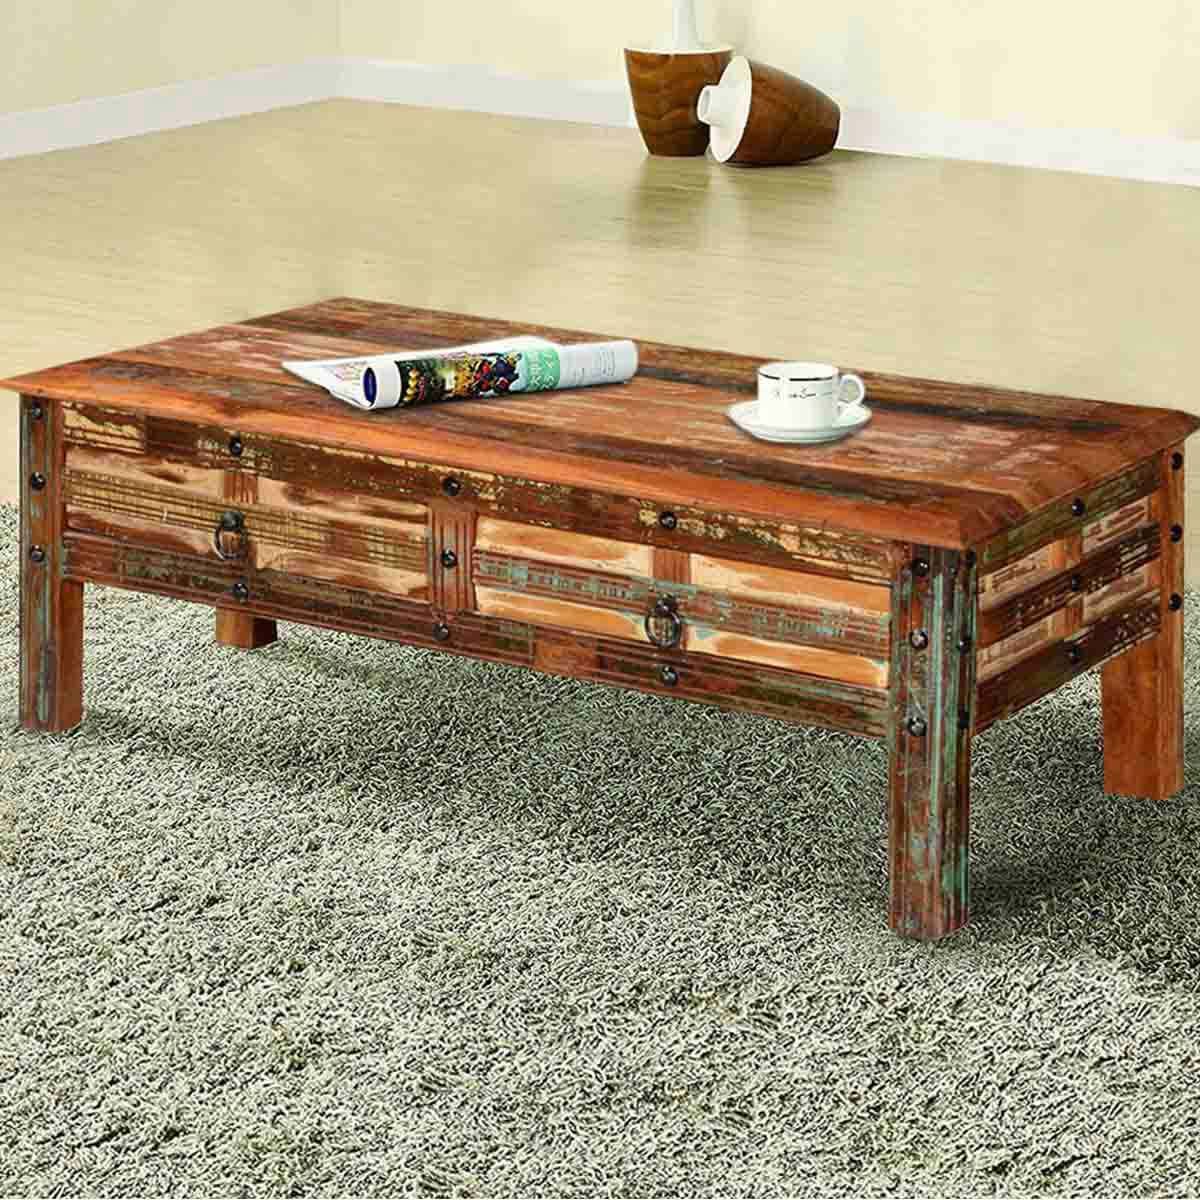 Pioneer Rustic Reclaimed Wood 2 Drawer Coffee Table Pertaining To 2 Drawer Coffee Tables (View 19 of 20)